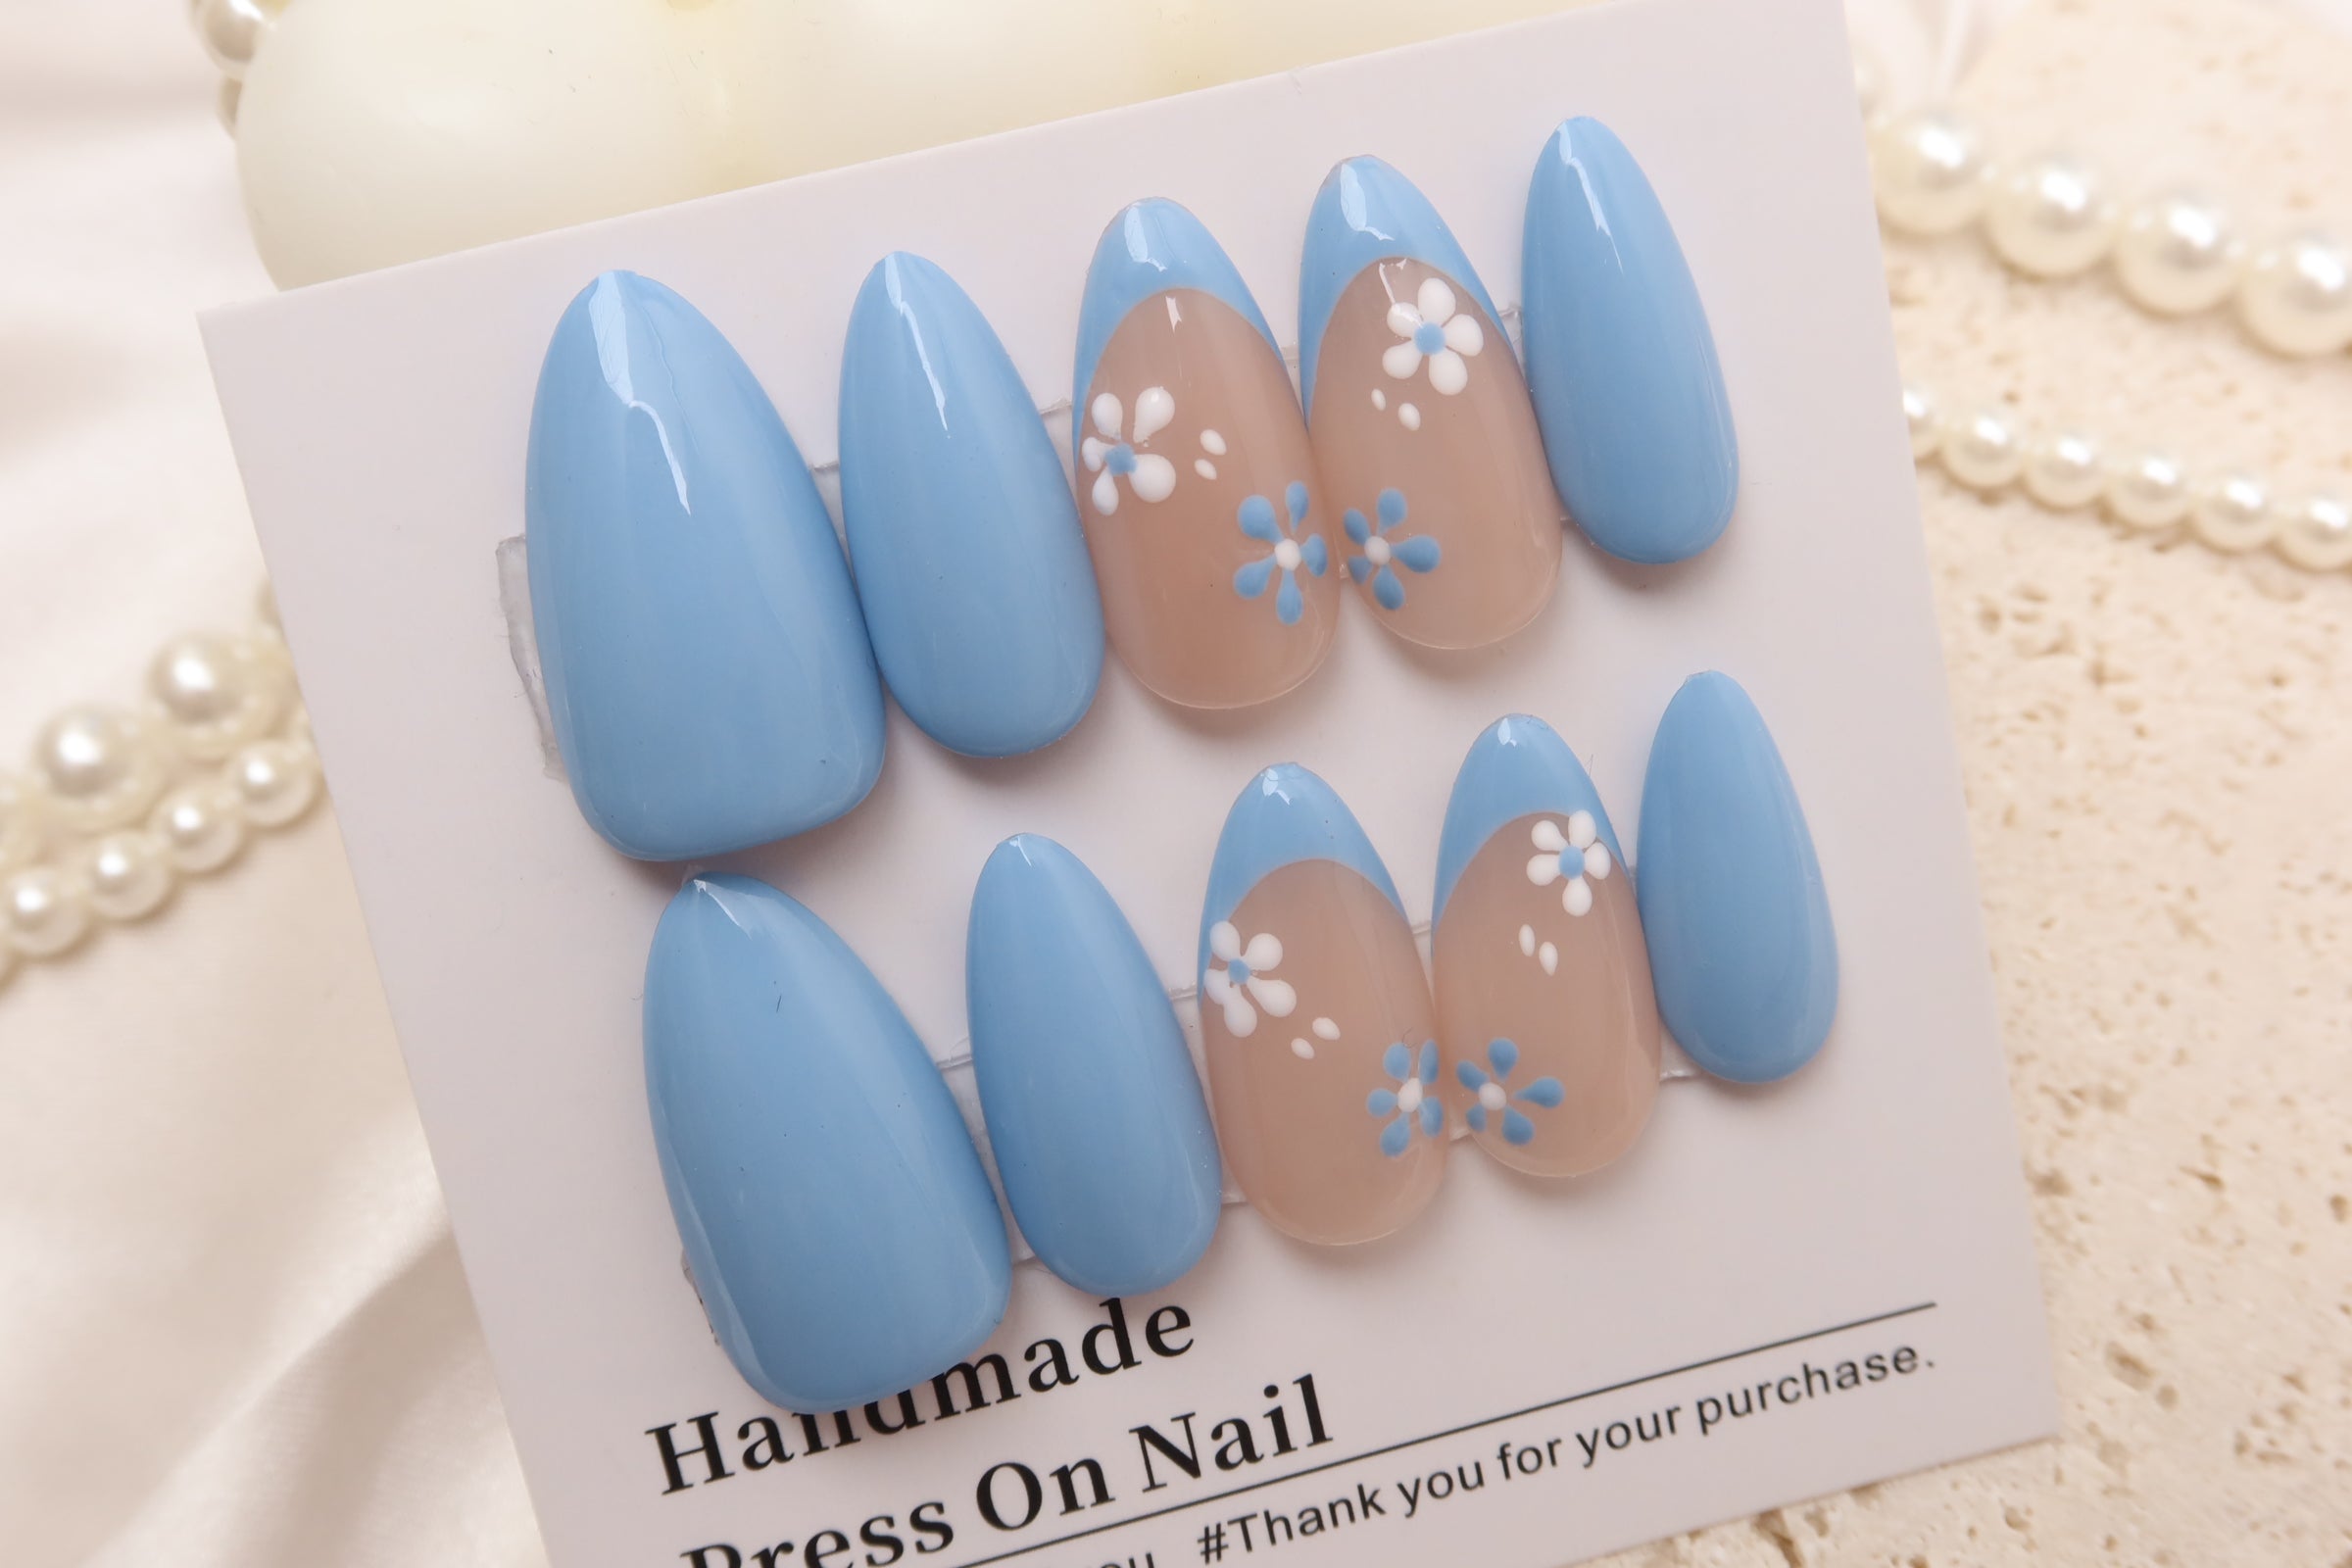 Blue Fower French Tip | Handmade Press on Nail